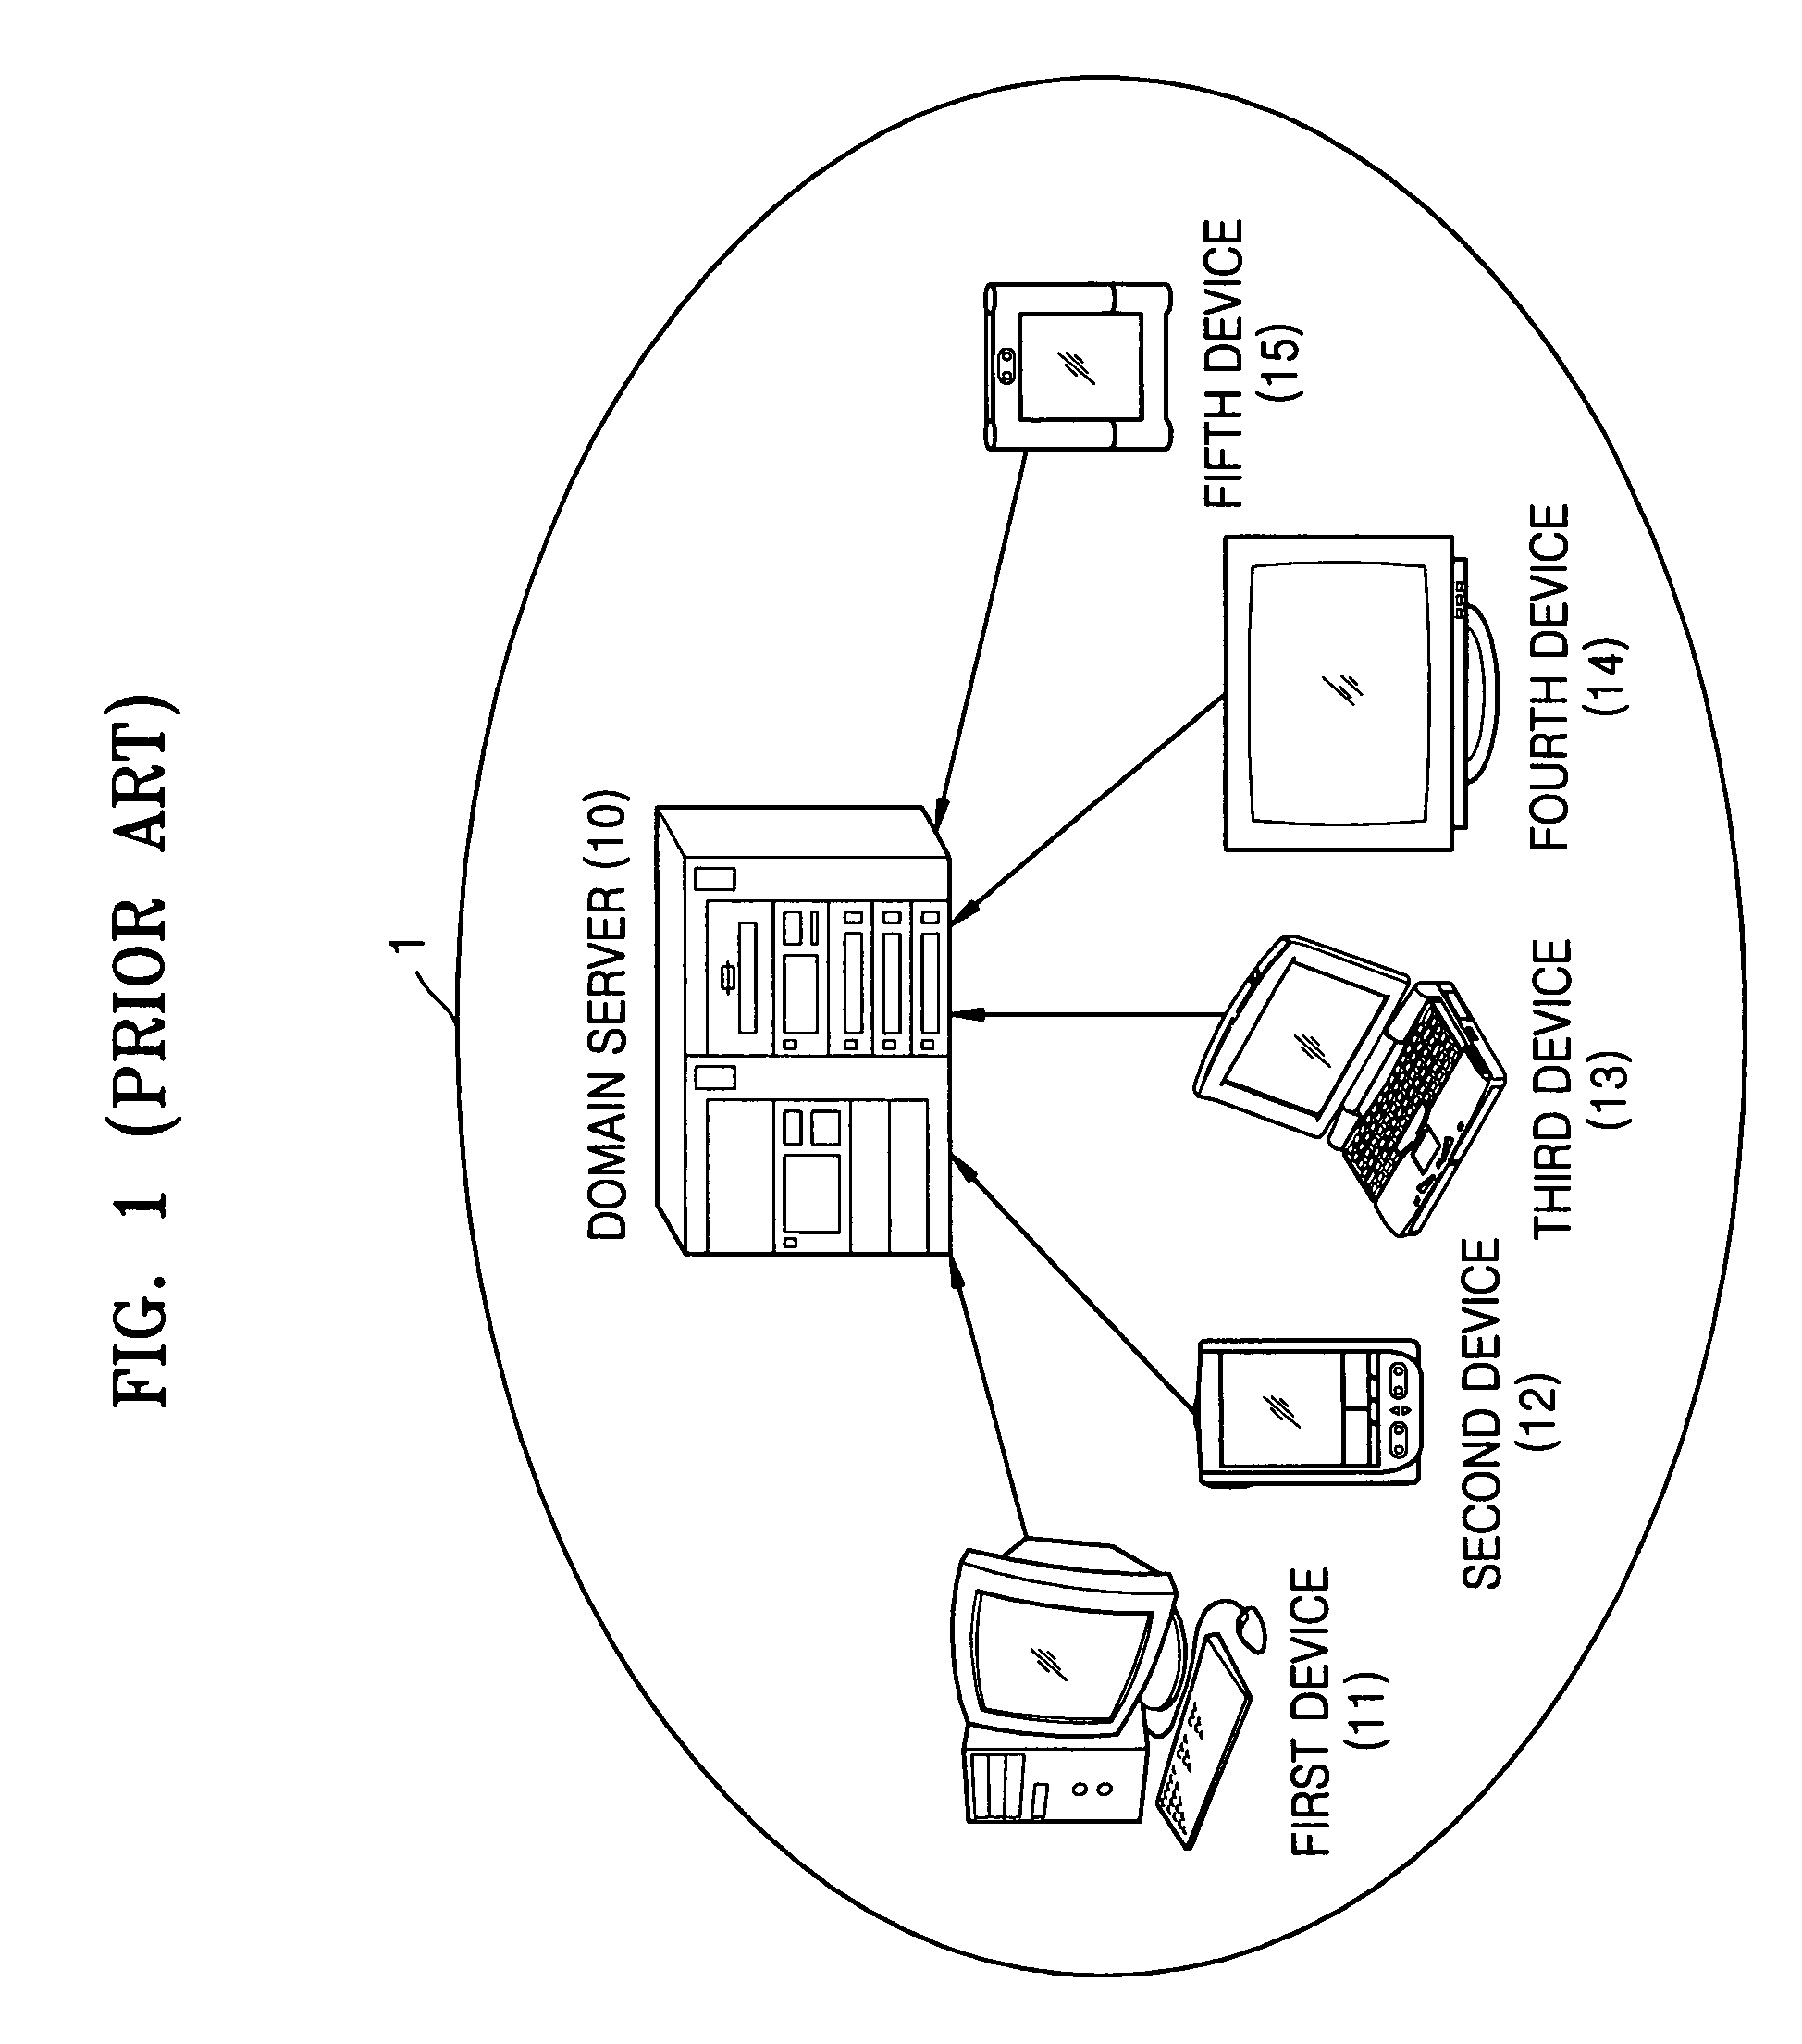 Method and apparatus for backing up and restoring domain information